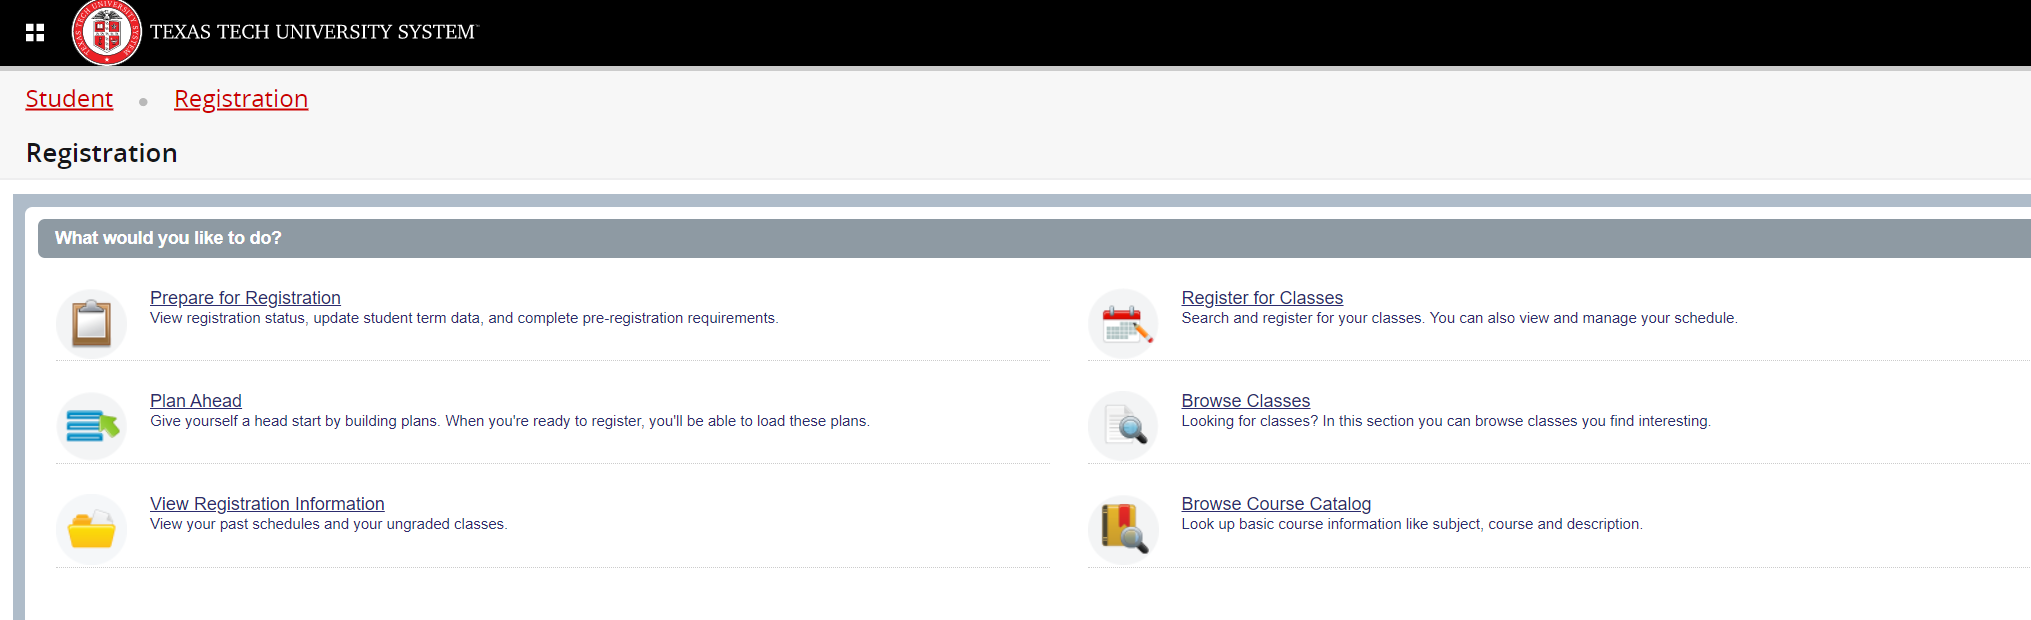 Screenshot of Student Registration Home page